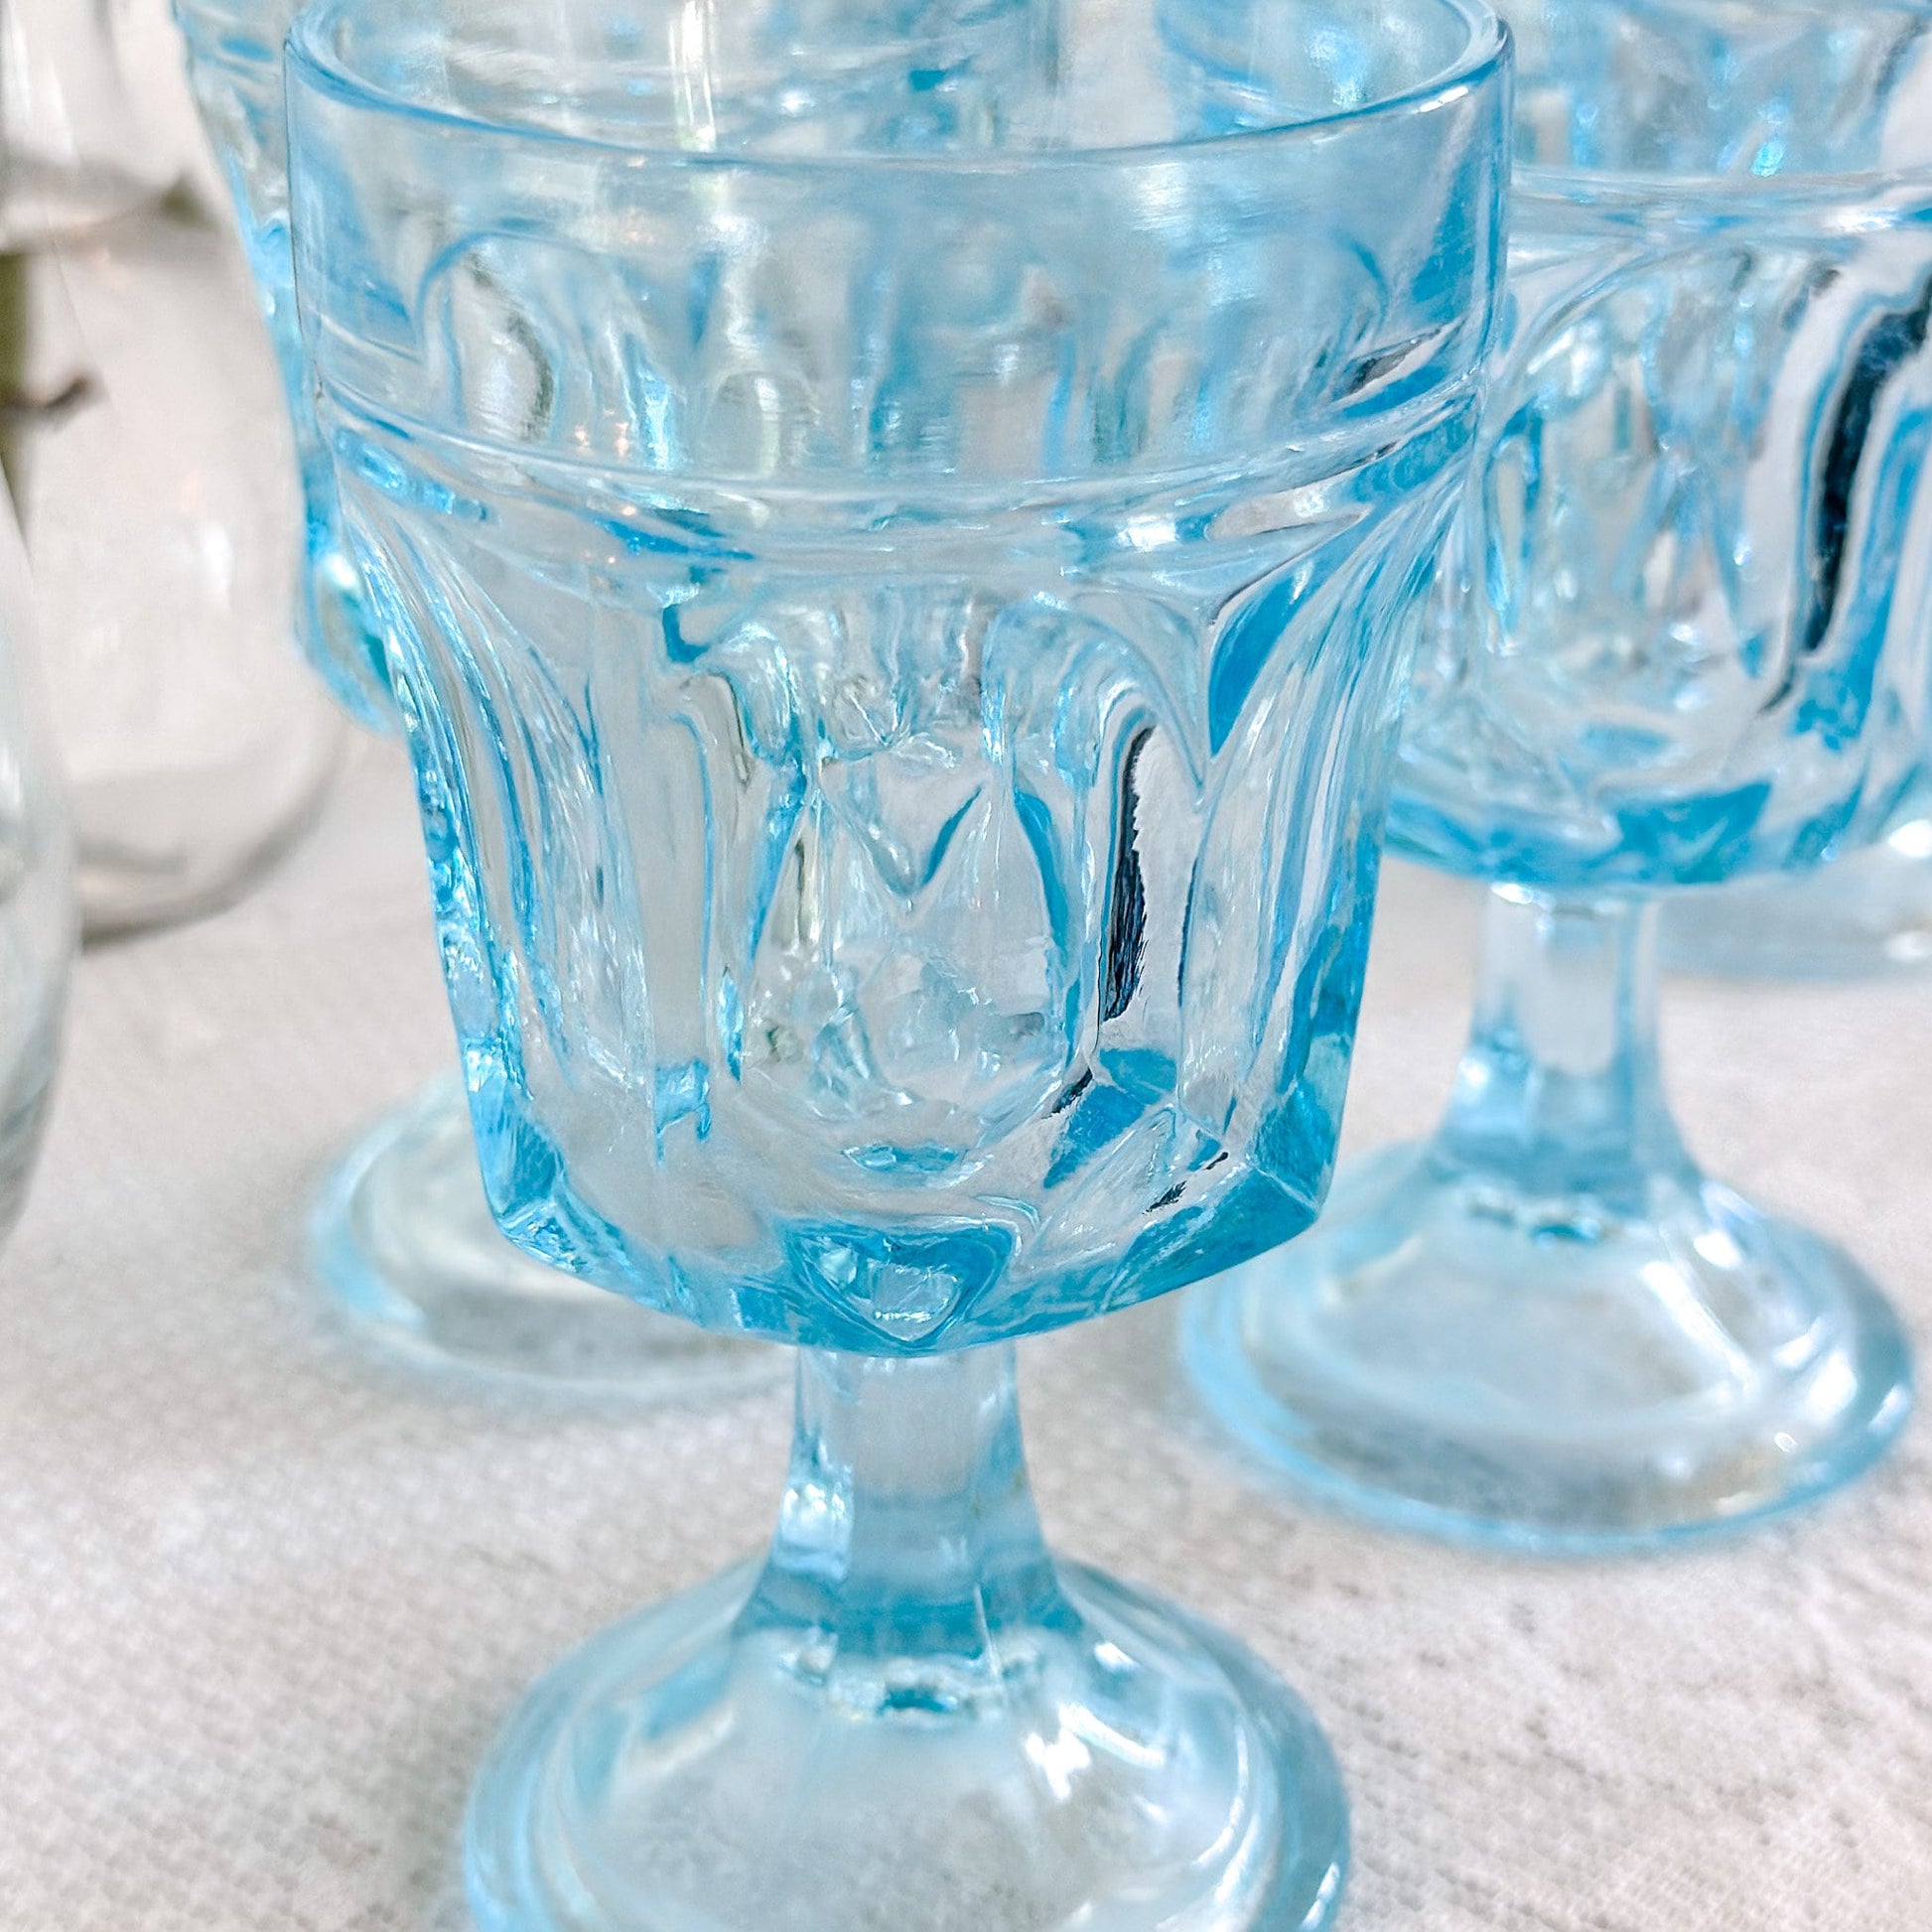 Vintage Glass, Anchor Hocking Glass, Barware, Thinking of You Gift, Gift for Mom